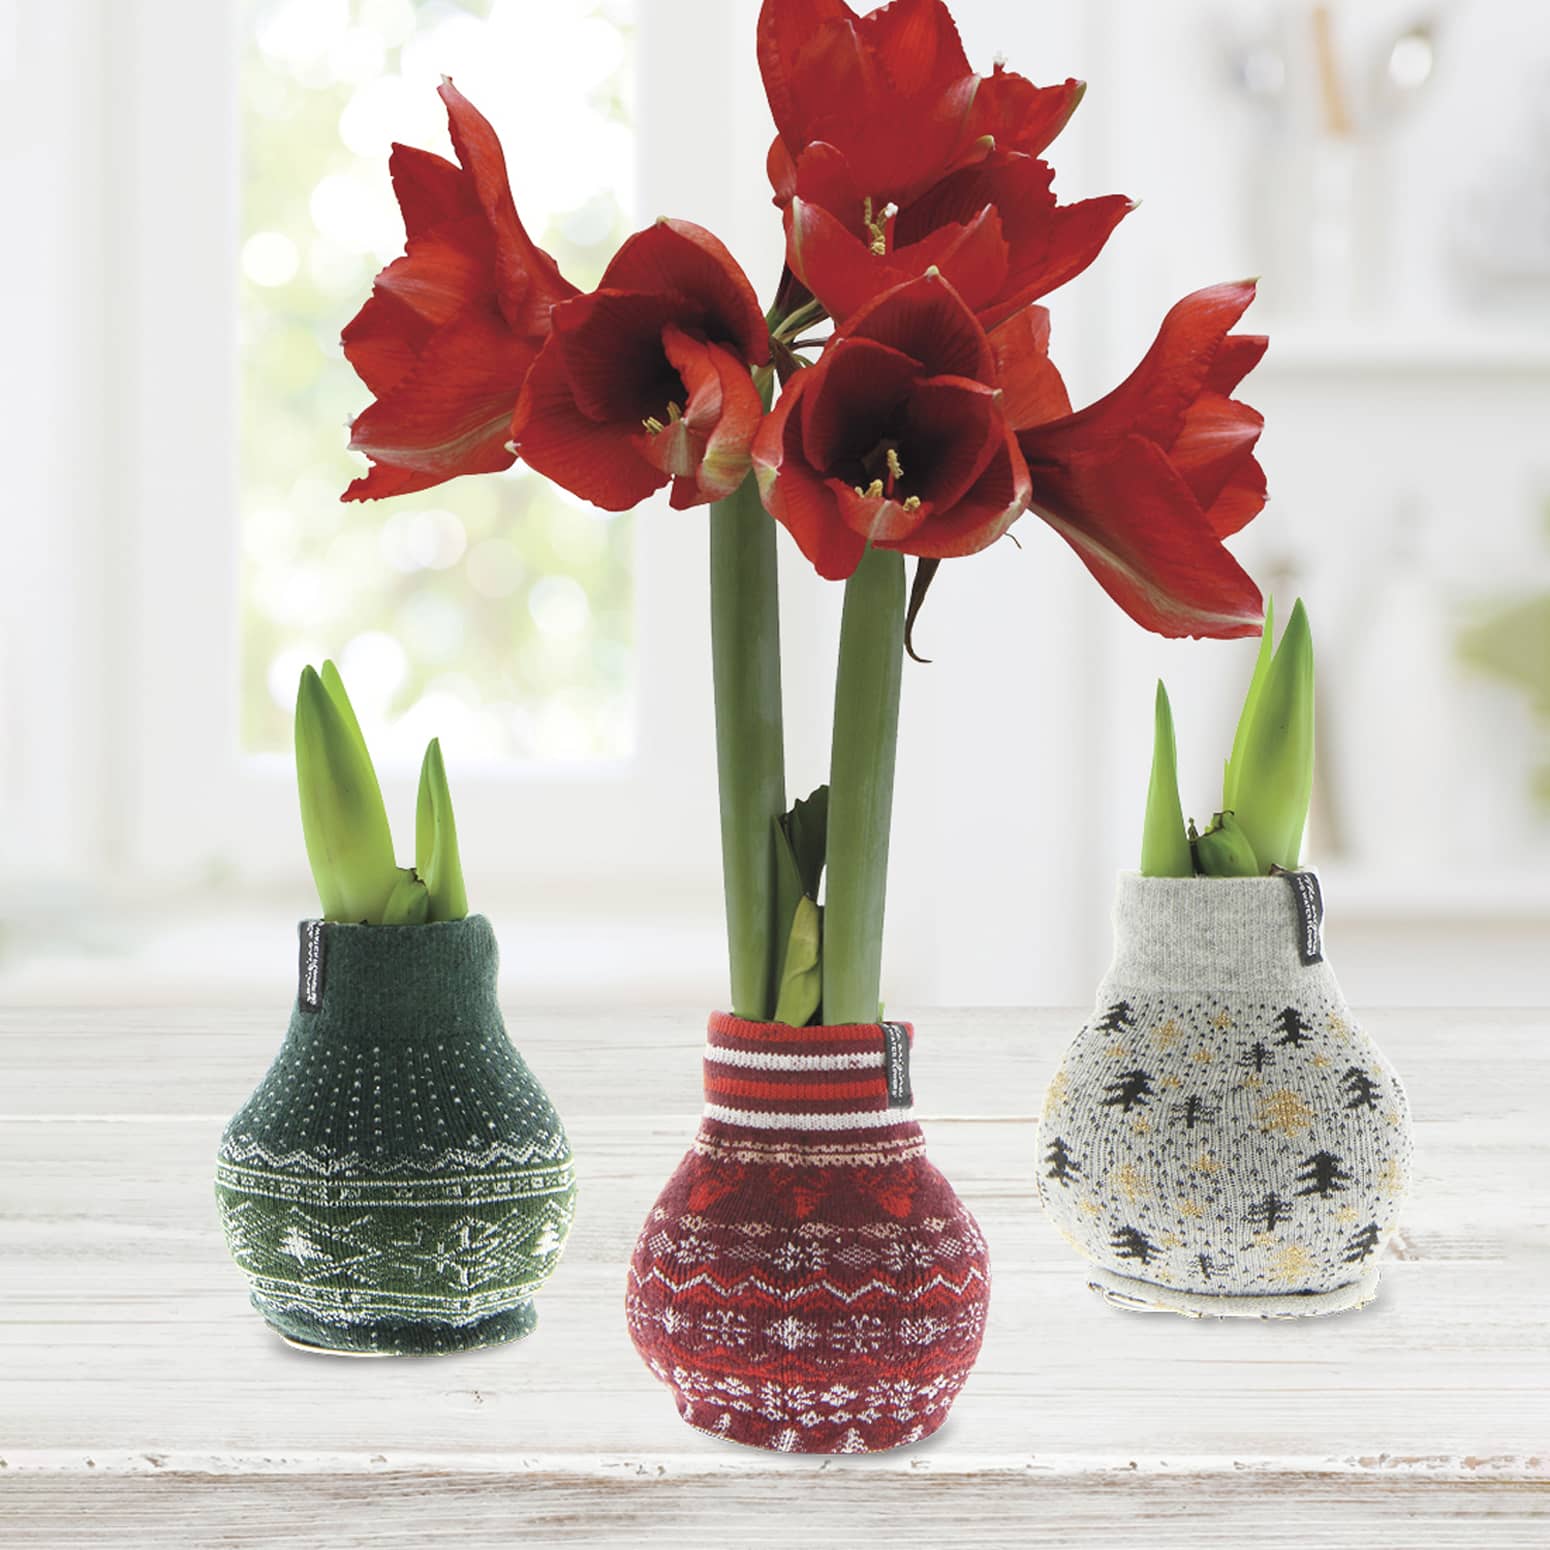 Waxed Amaryllis Flower Bulbs with Nordic Sweaters